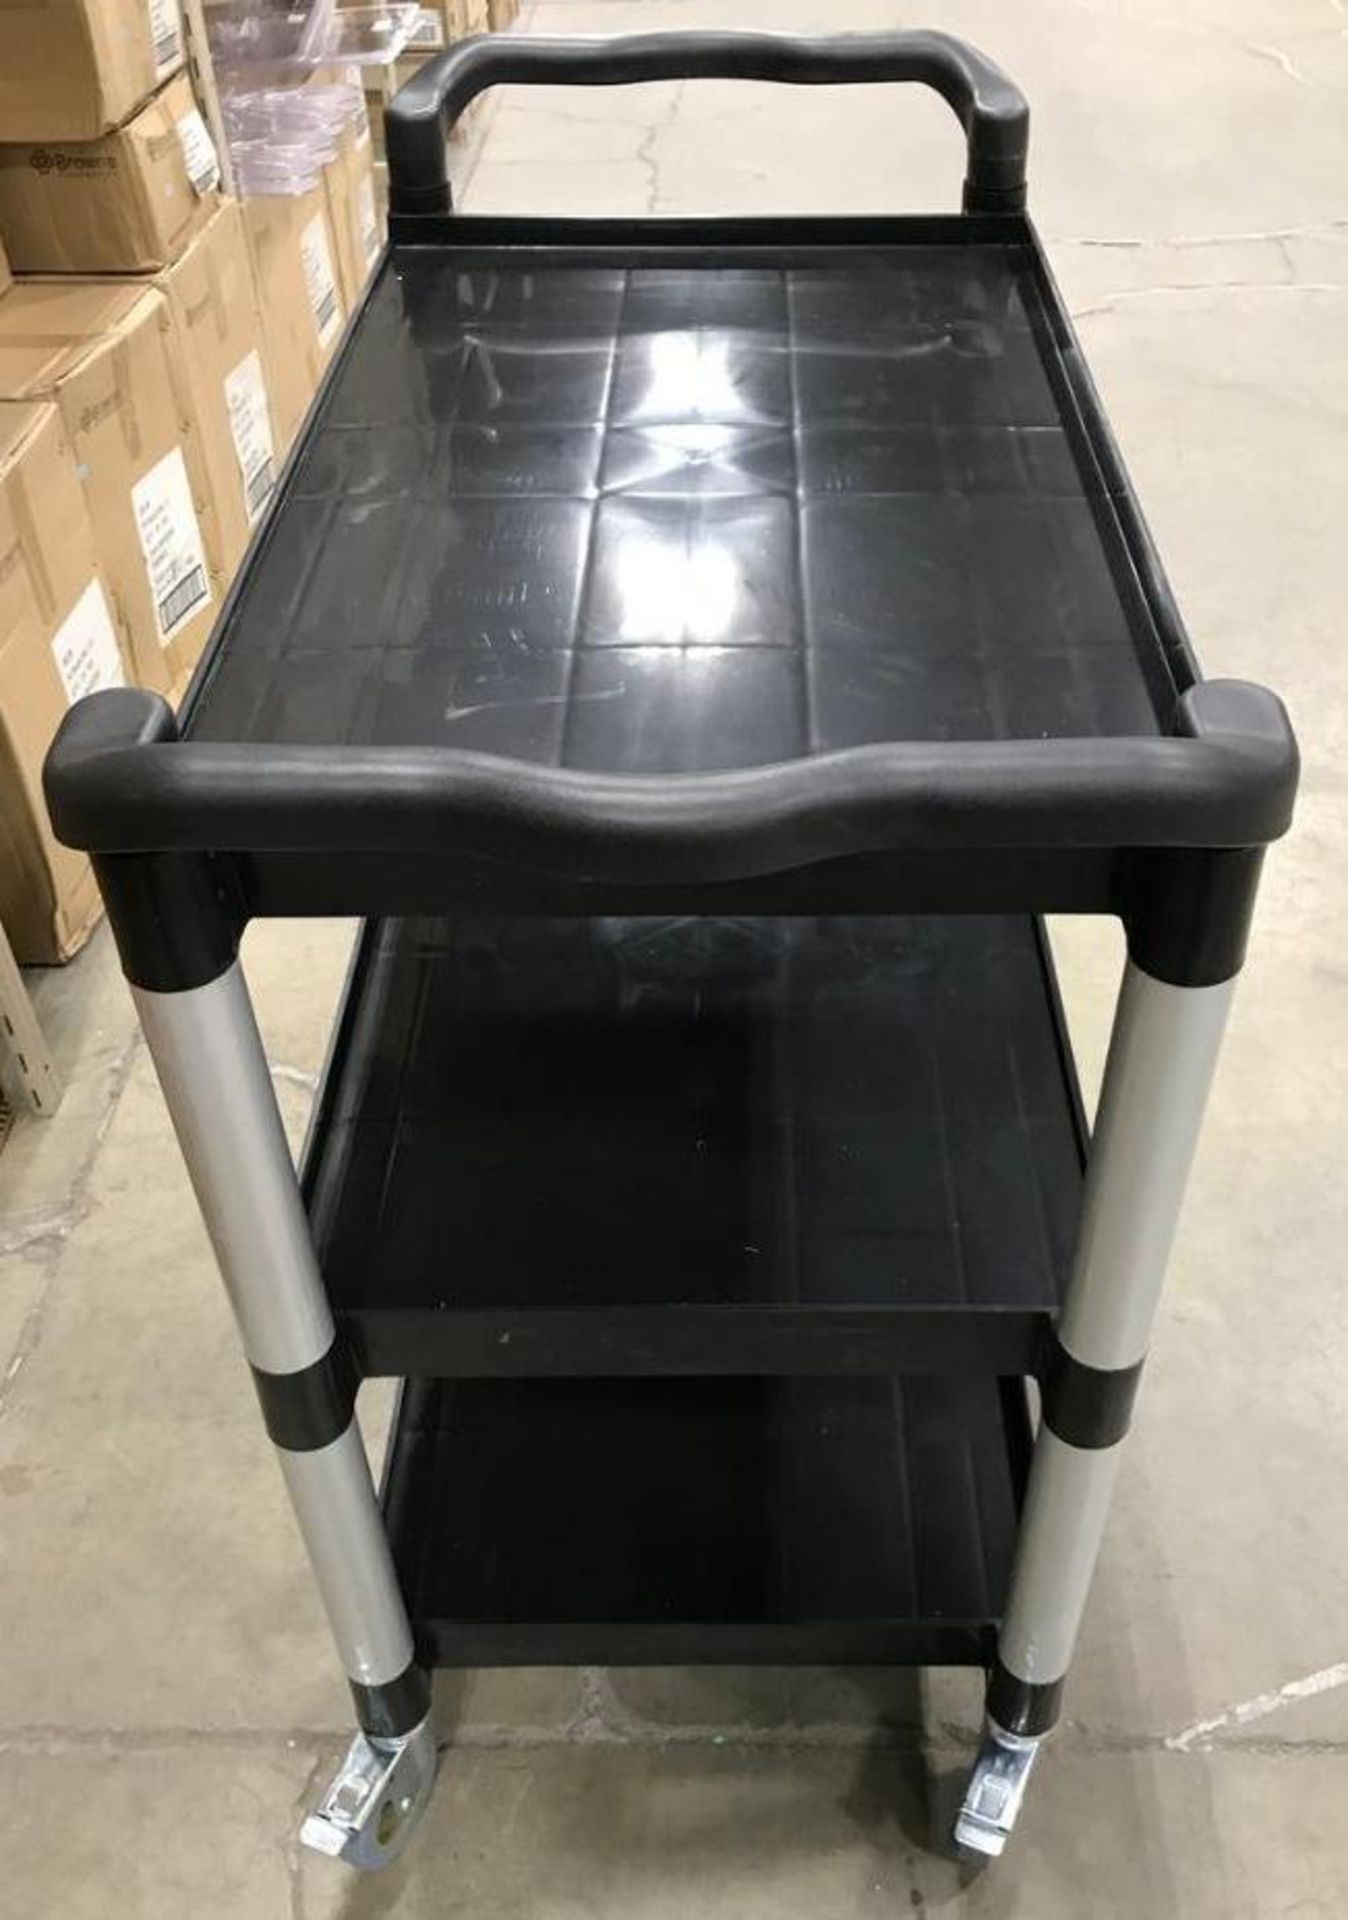 3-TIER TROLLEY CART, BLACK, 19-3/4"X42-1/2"X37-7/8"H, 120-T2042 - NEW - Image 3 of 4